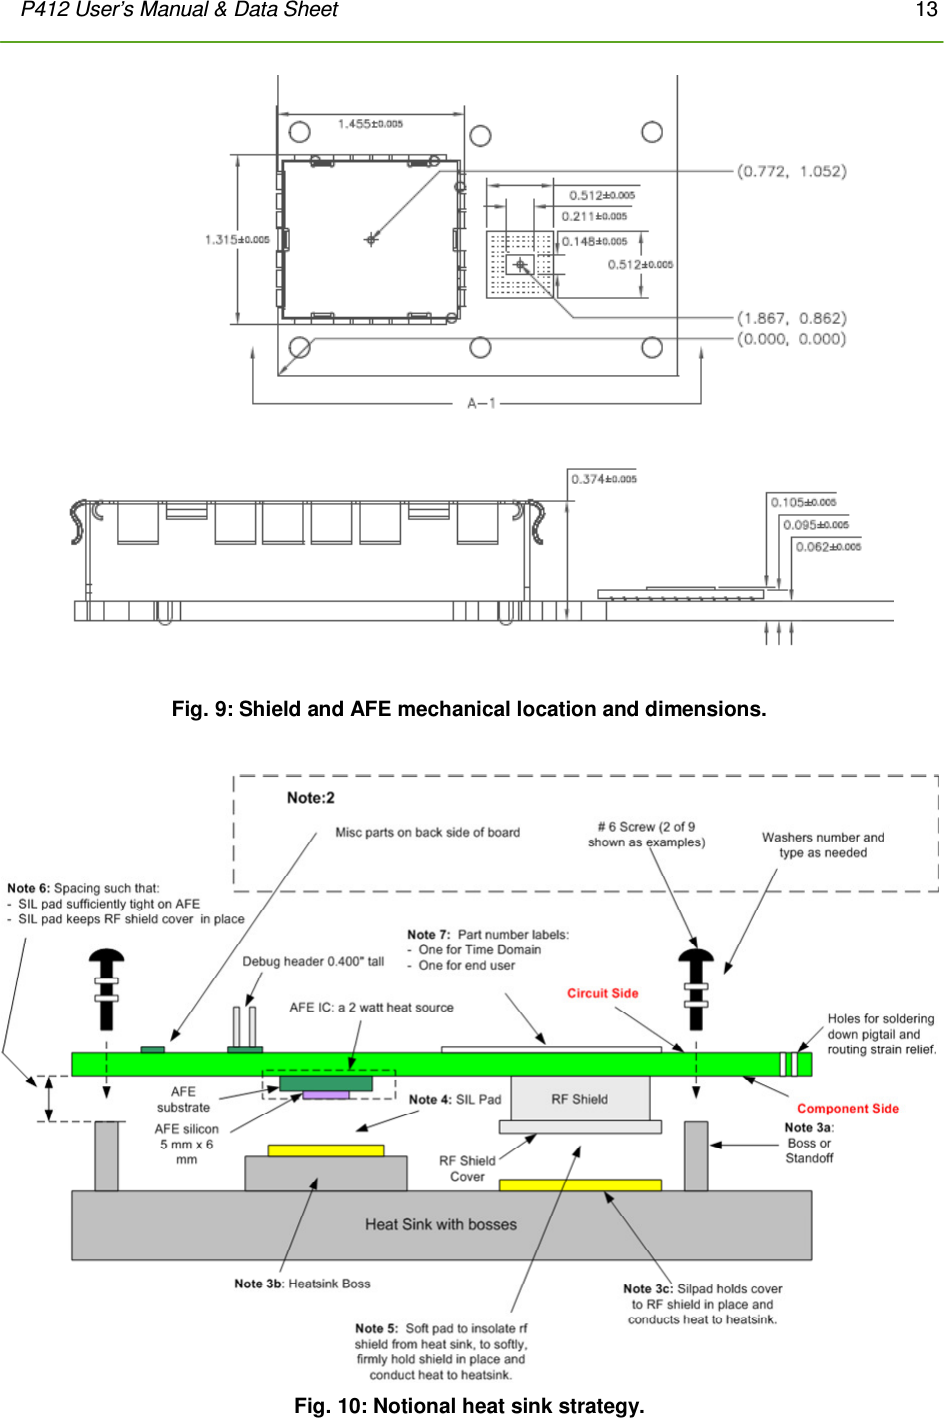 P412 User’s Manual &amp; Data Sheet       13        Fig. 9: Shield and AFE mechanical location and dimensions.   Fig. 10: Notional heat sink strategy. 